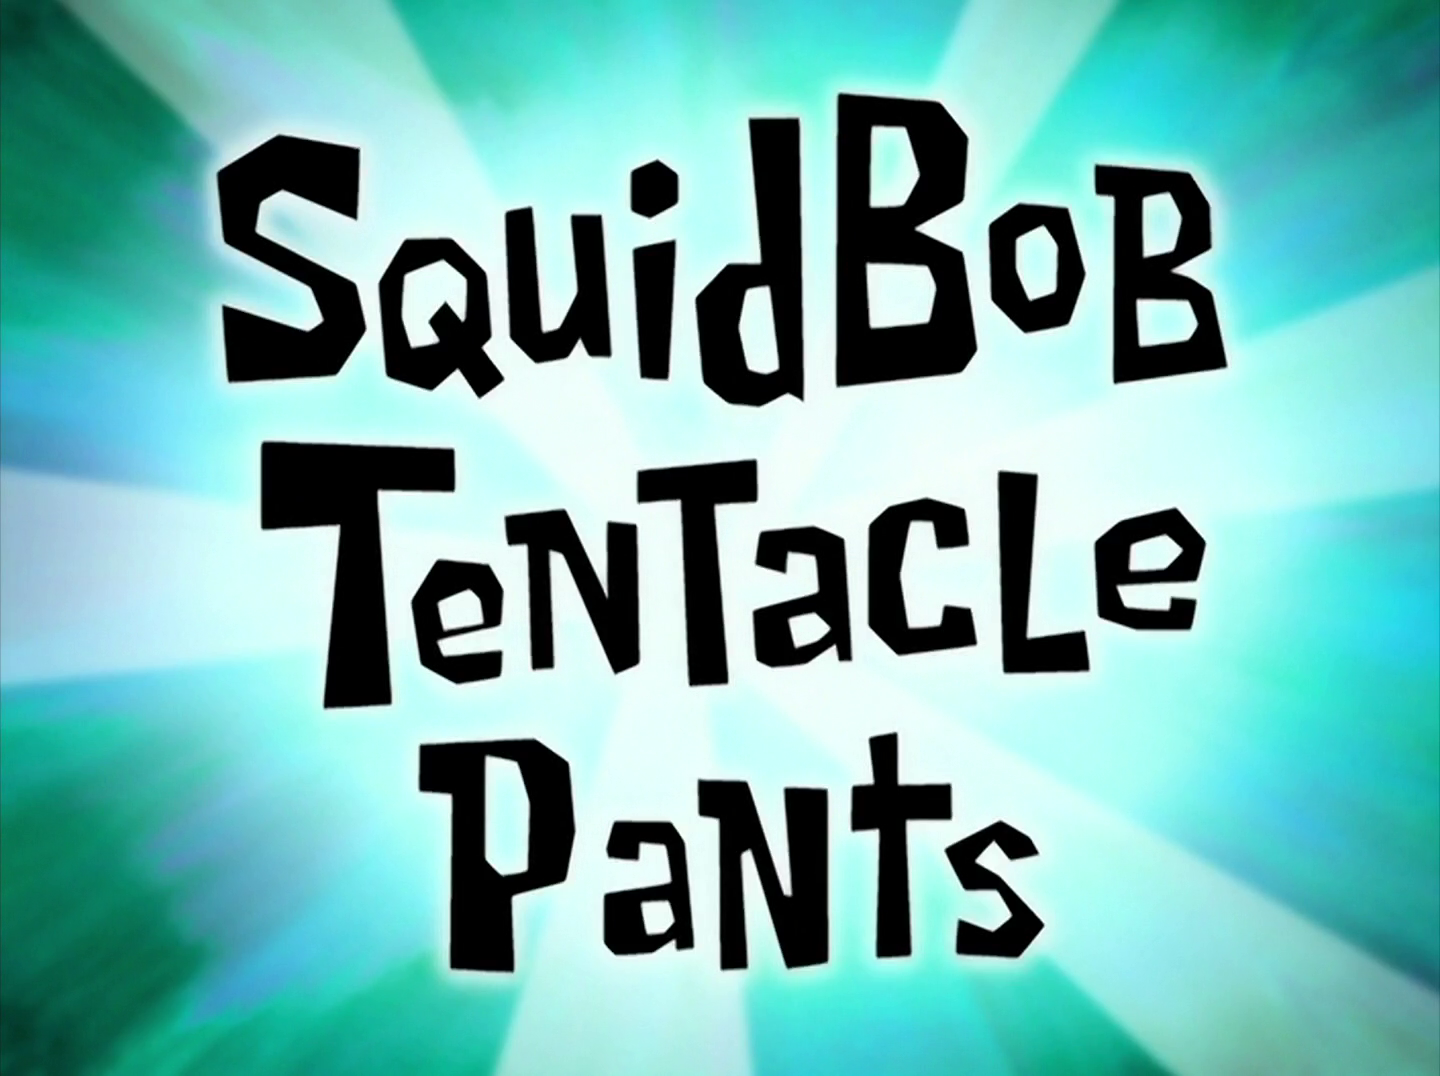 Image result for squidbob tentaclepants